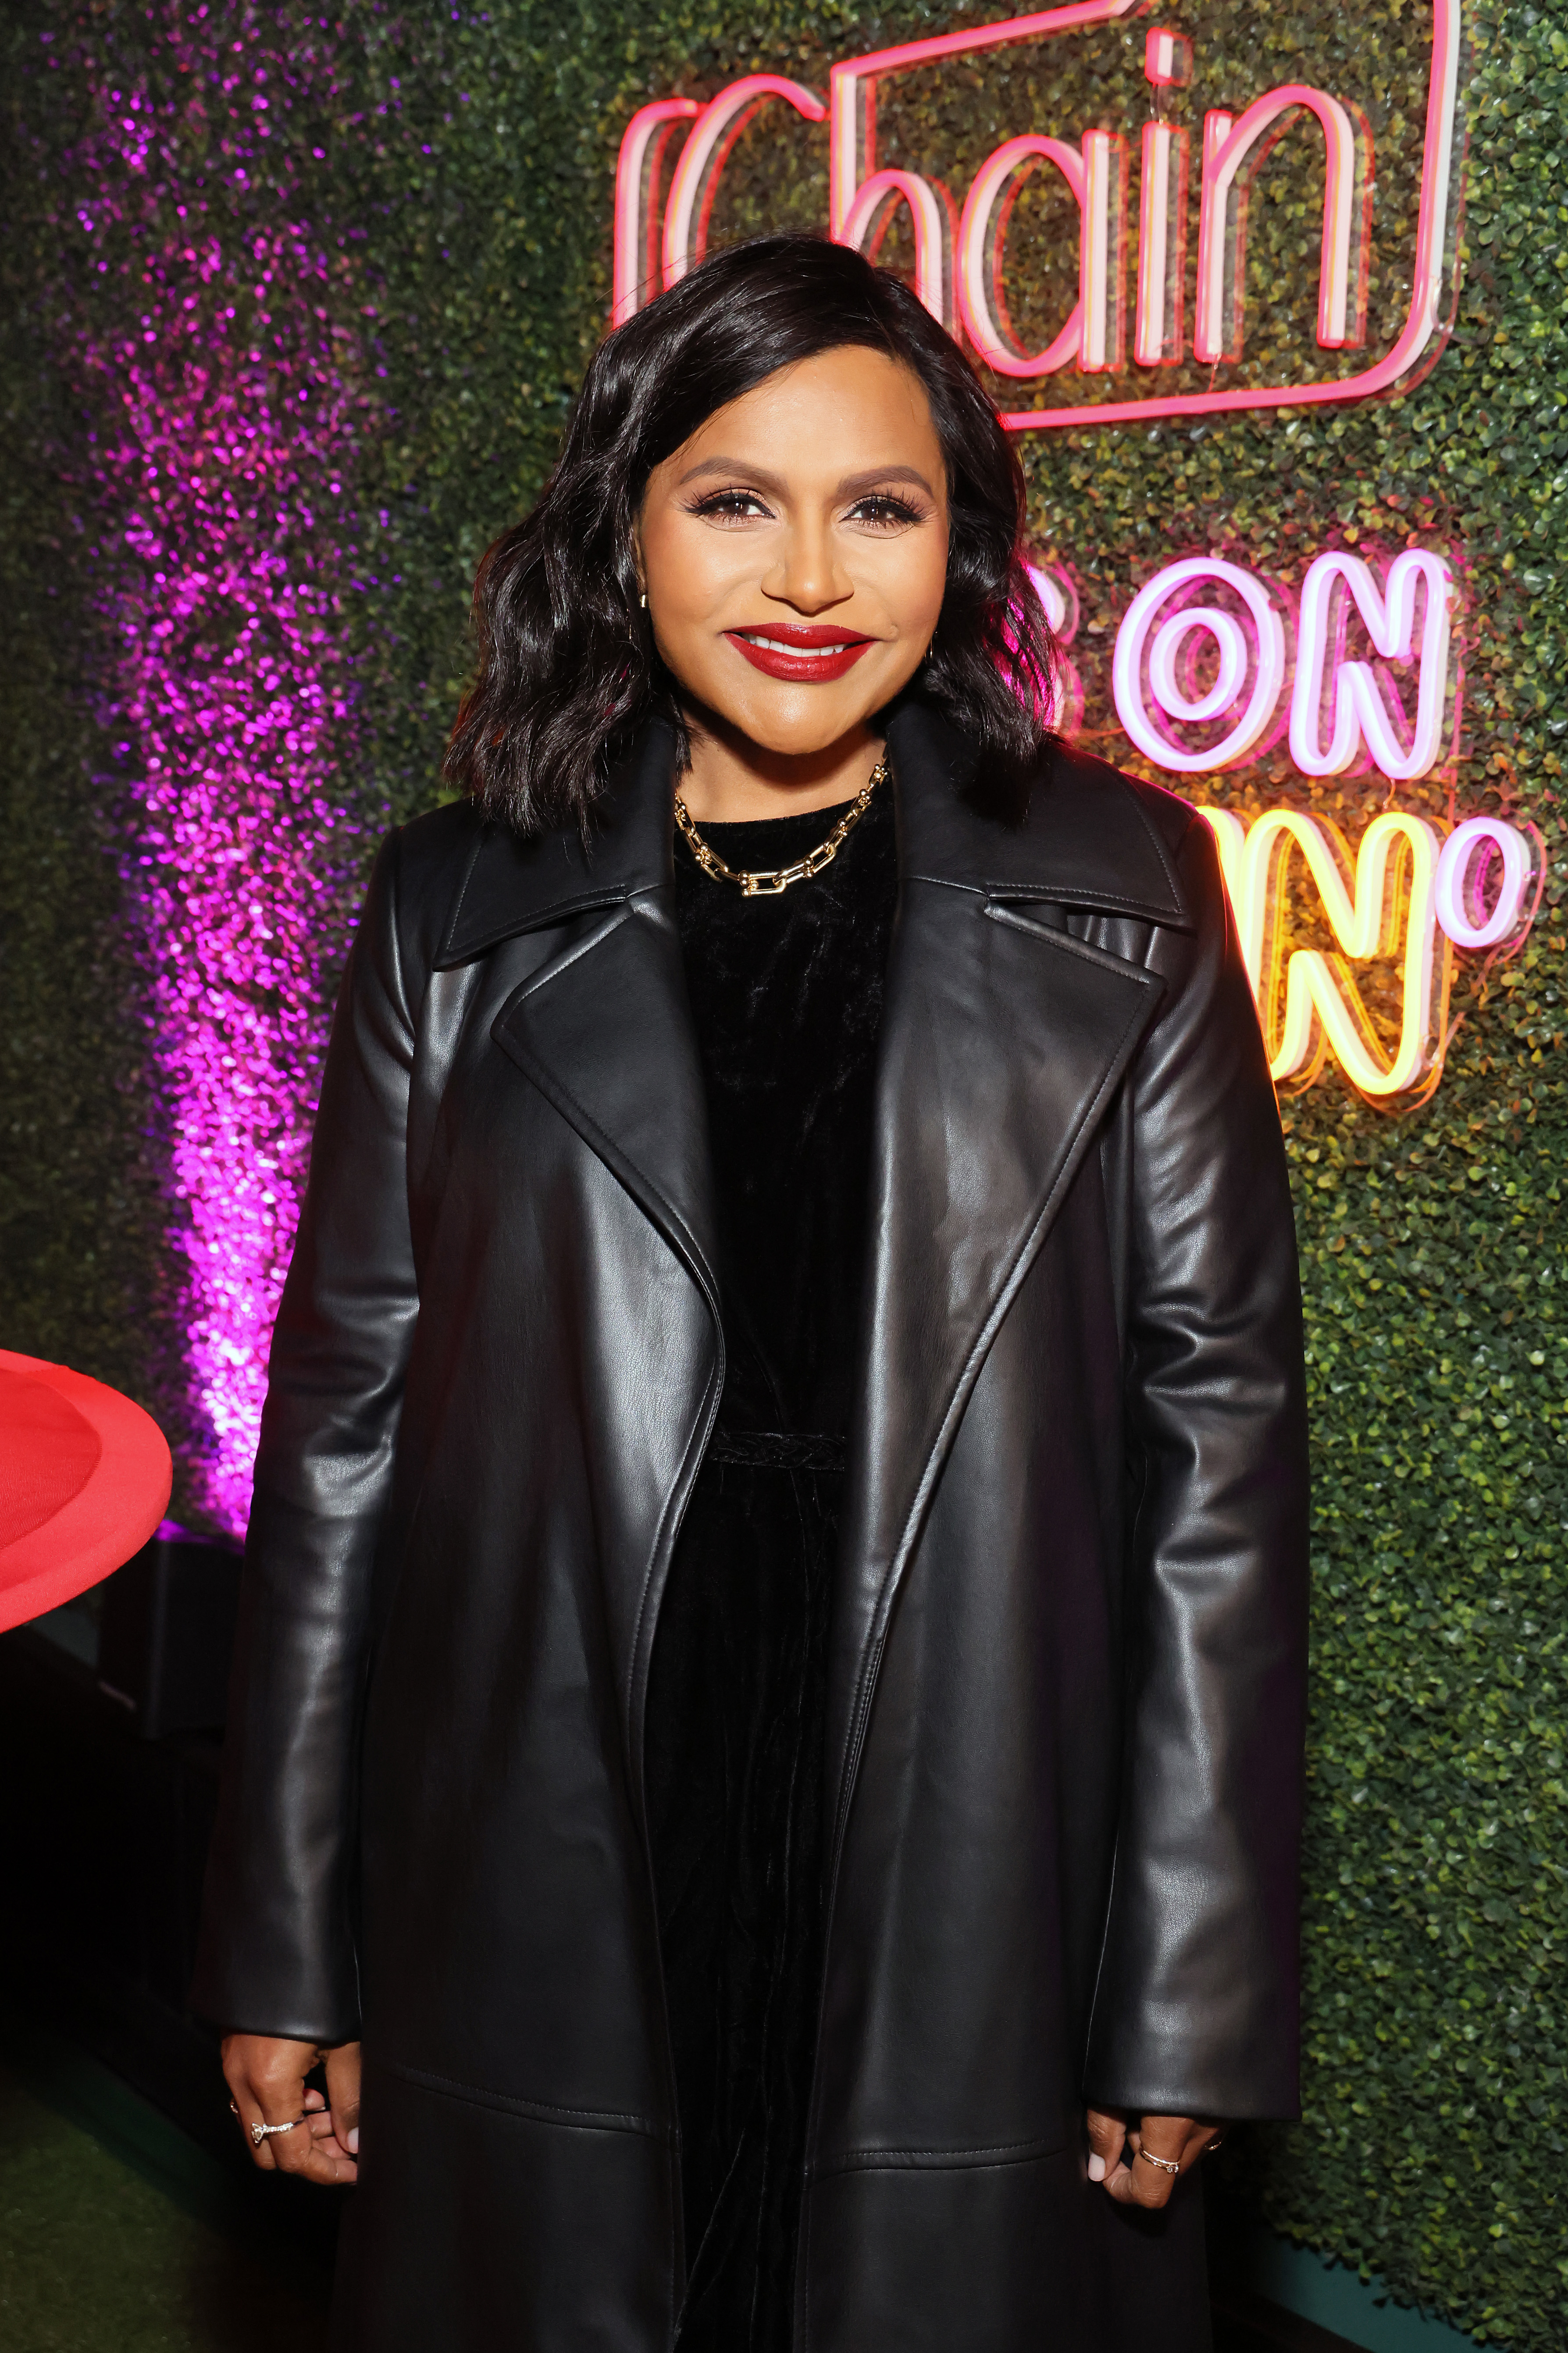 Close-up of Mindy smiling at a media event and wearing a leather coat